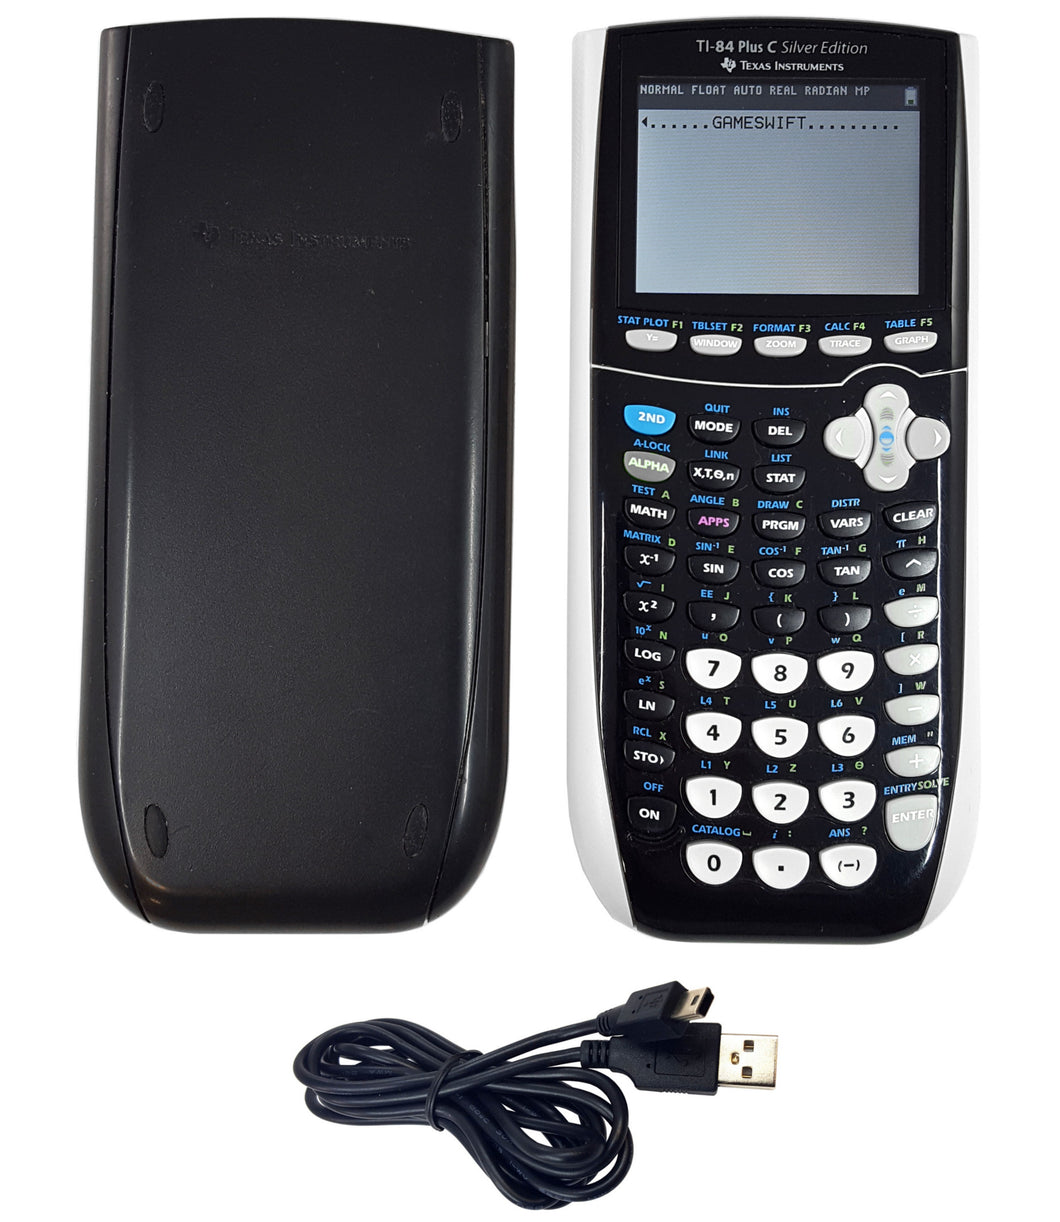 Texas Instruments TI-84 Plus C Silver Edition Graphing Calculator - Black